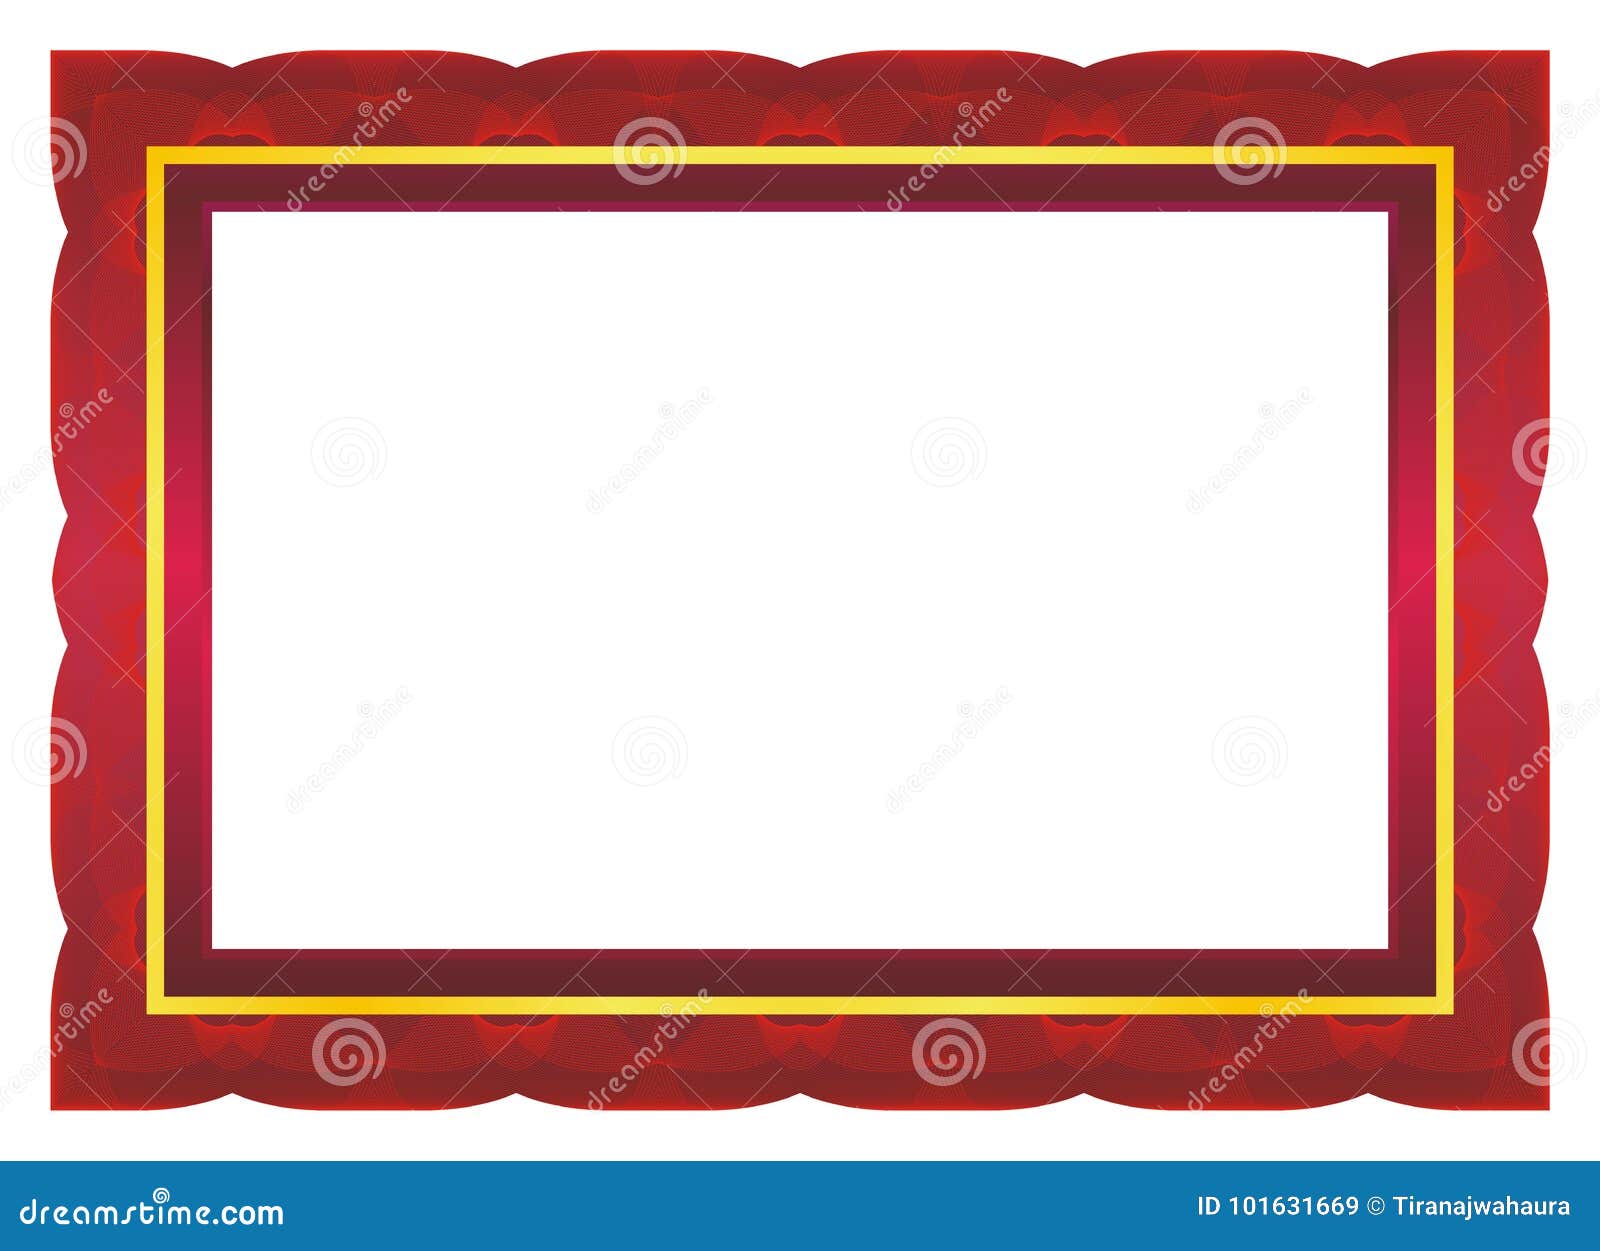 Diploma Frame. Certificate or diploma template with red and gold color, suitable for invitation, card, awward, thanks card, background, and other